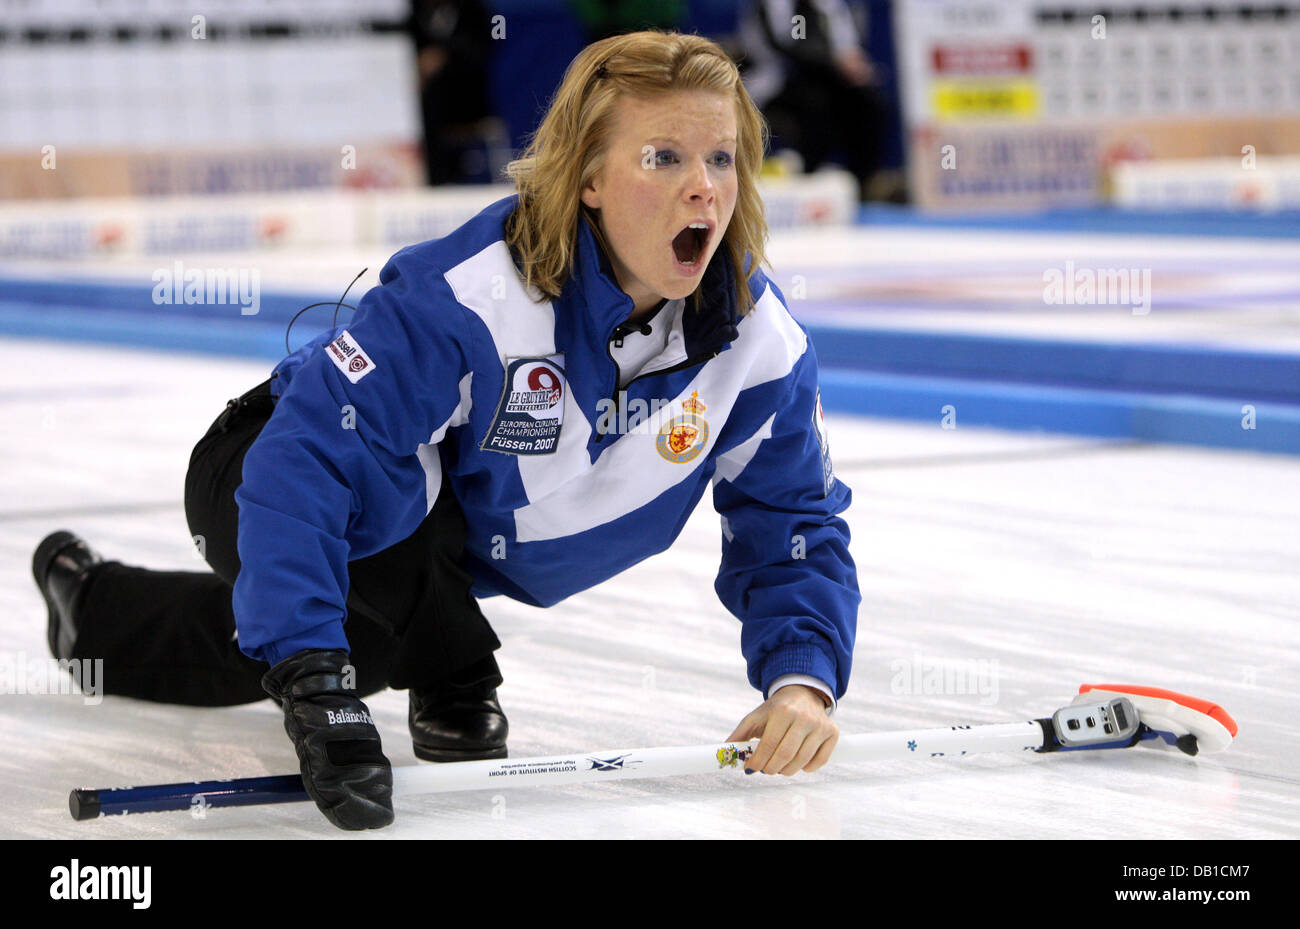 Kelly Wood of the Scottisch national women's curling team shows emotions during the finale of the 2007 European Curling Championships at Arena Fuessen in Fuessen, Germany, 07 December 2007. Sweden won against Scottland 9-4. Photo: KARL-JOSEF HILDENBRAND Stock Photo